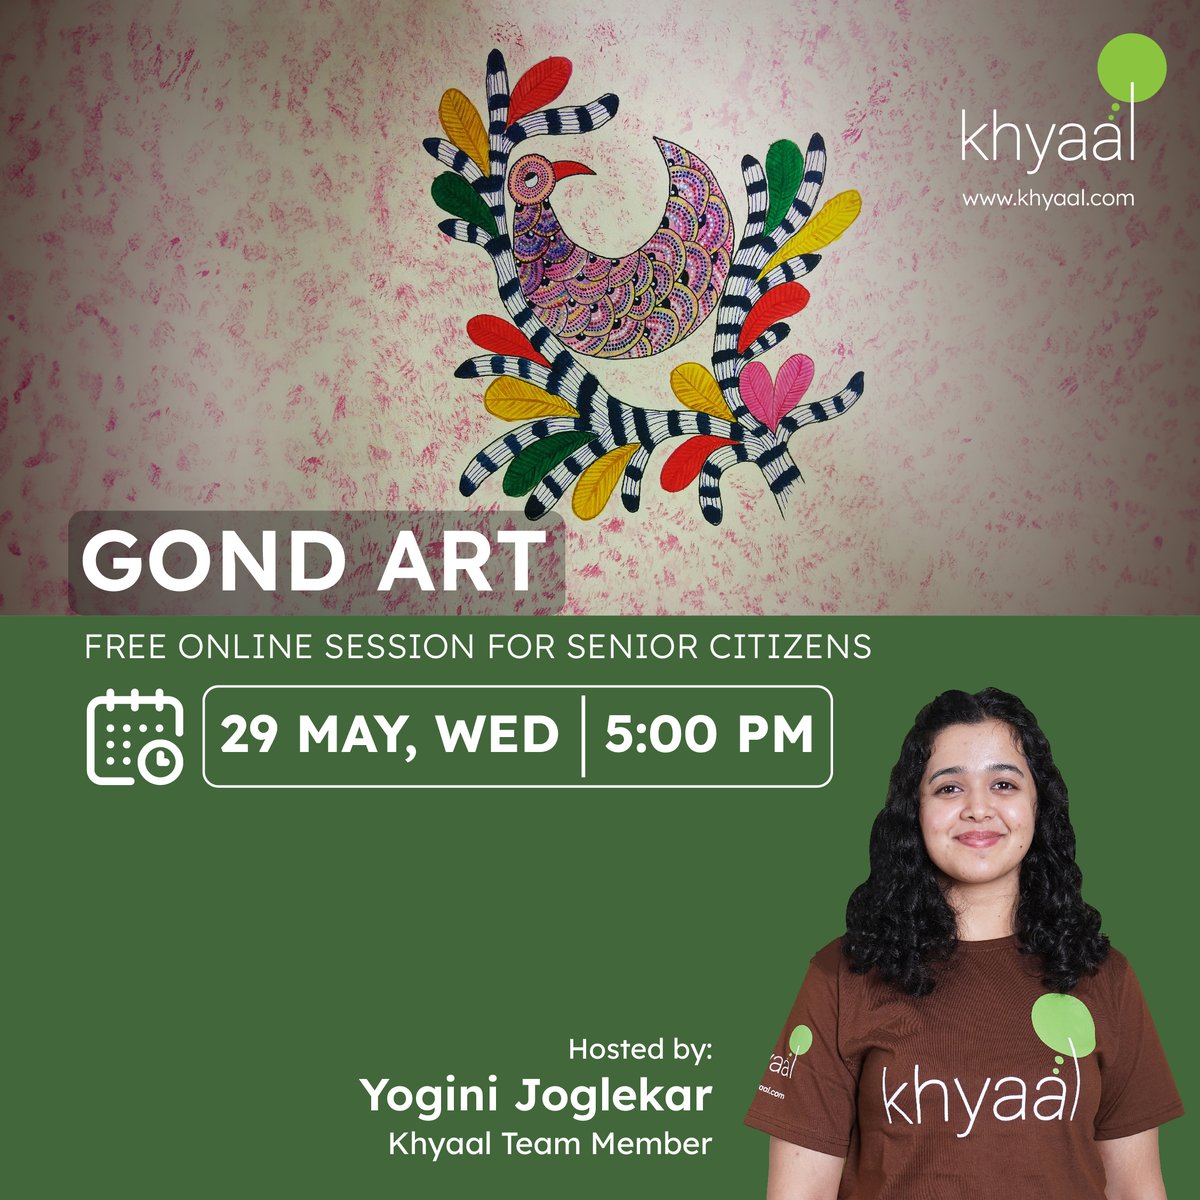 Learn about the intricacies of Gond art and create beautiful artwork. Attend this session if you are above the age of 55 years or share it with an elderly loved one.
#gondart #seniorcitizens
To attend our exclusive sessions:
📱 Download the app : bit.ly/3Kh2aFw
📞 Call